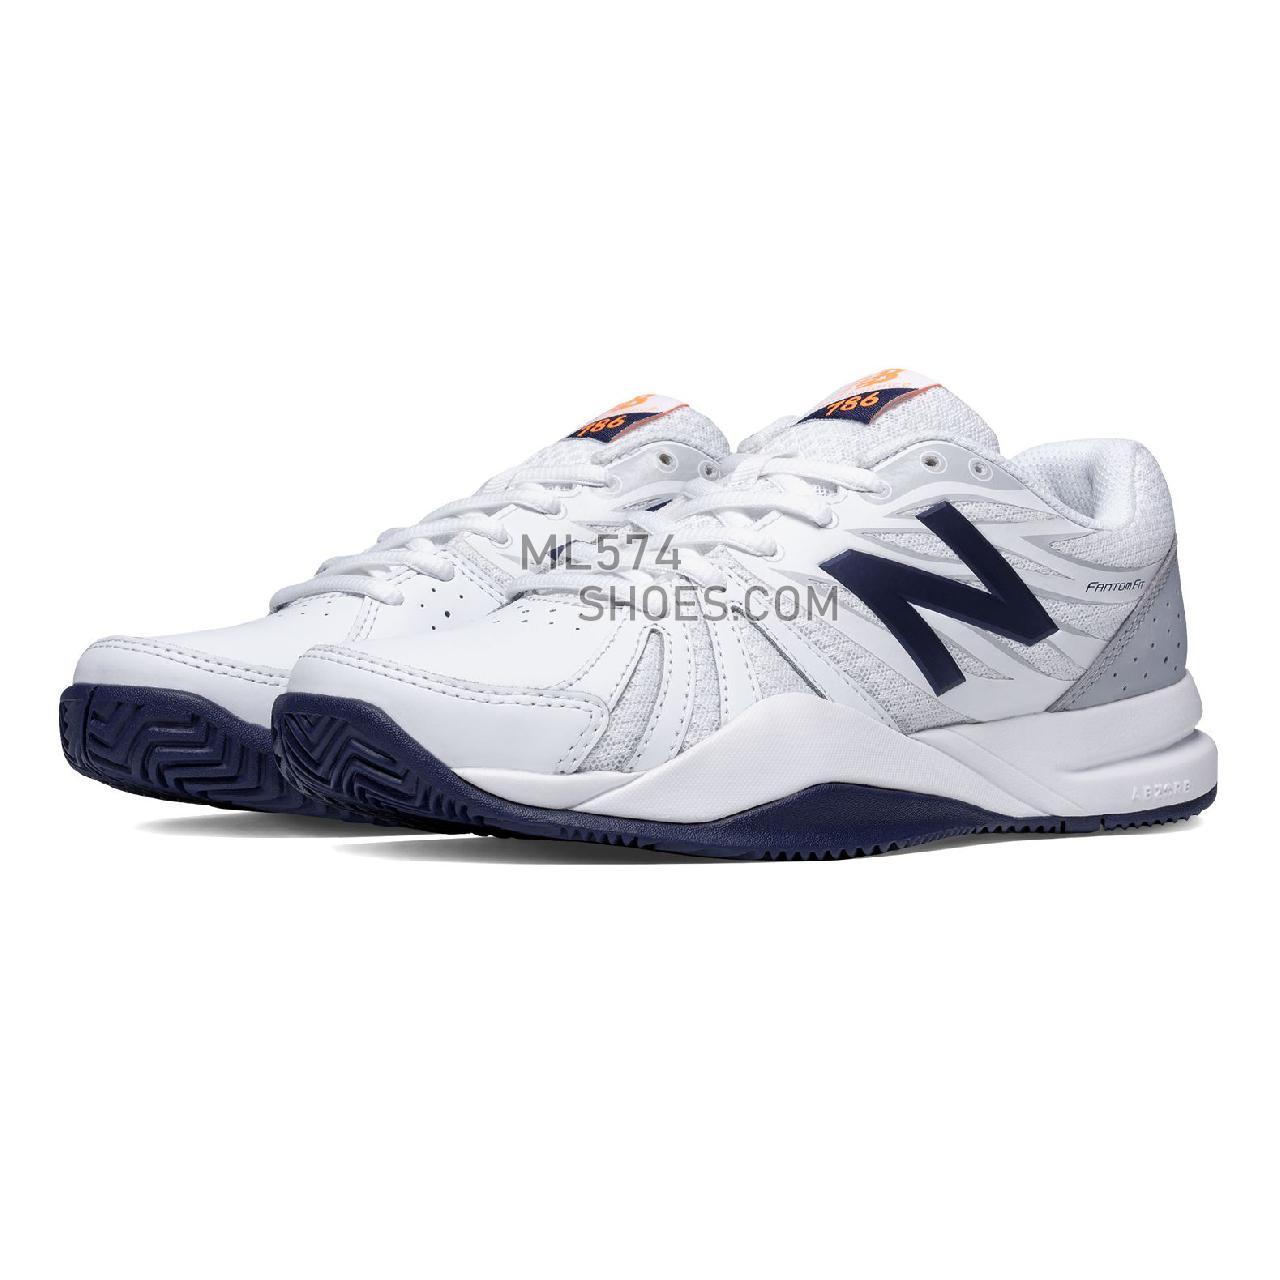 New Balance 786v2 - Women's 786 - Tennis / Court White with Blue - WC786WN2